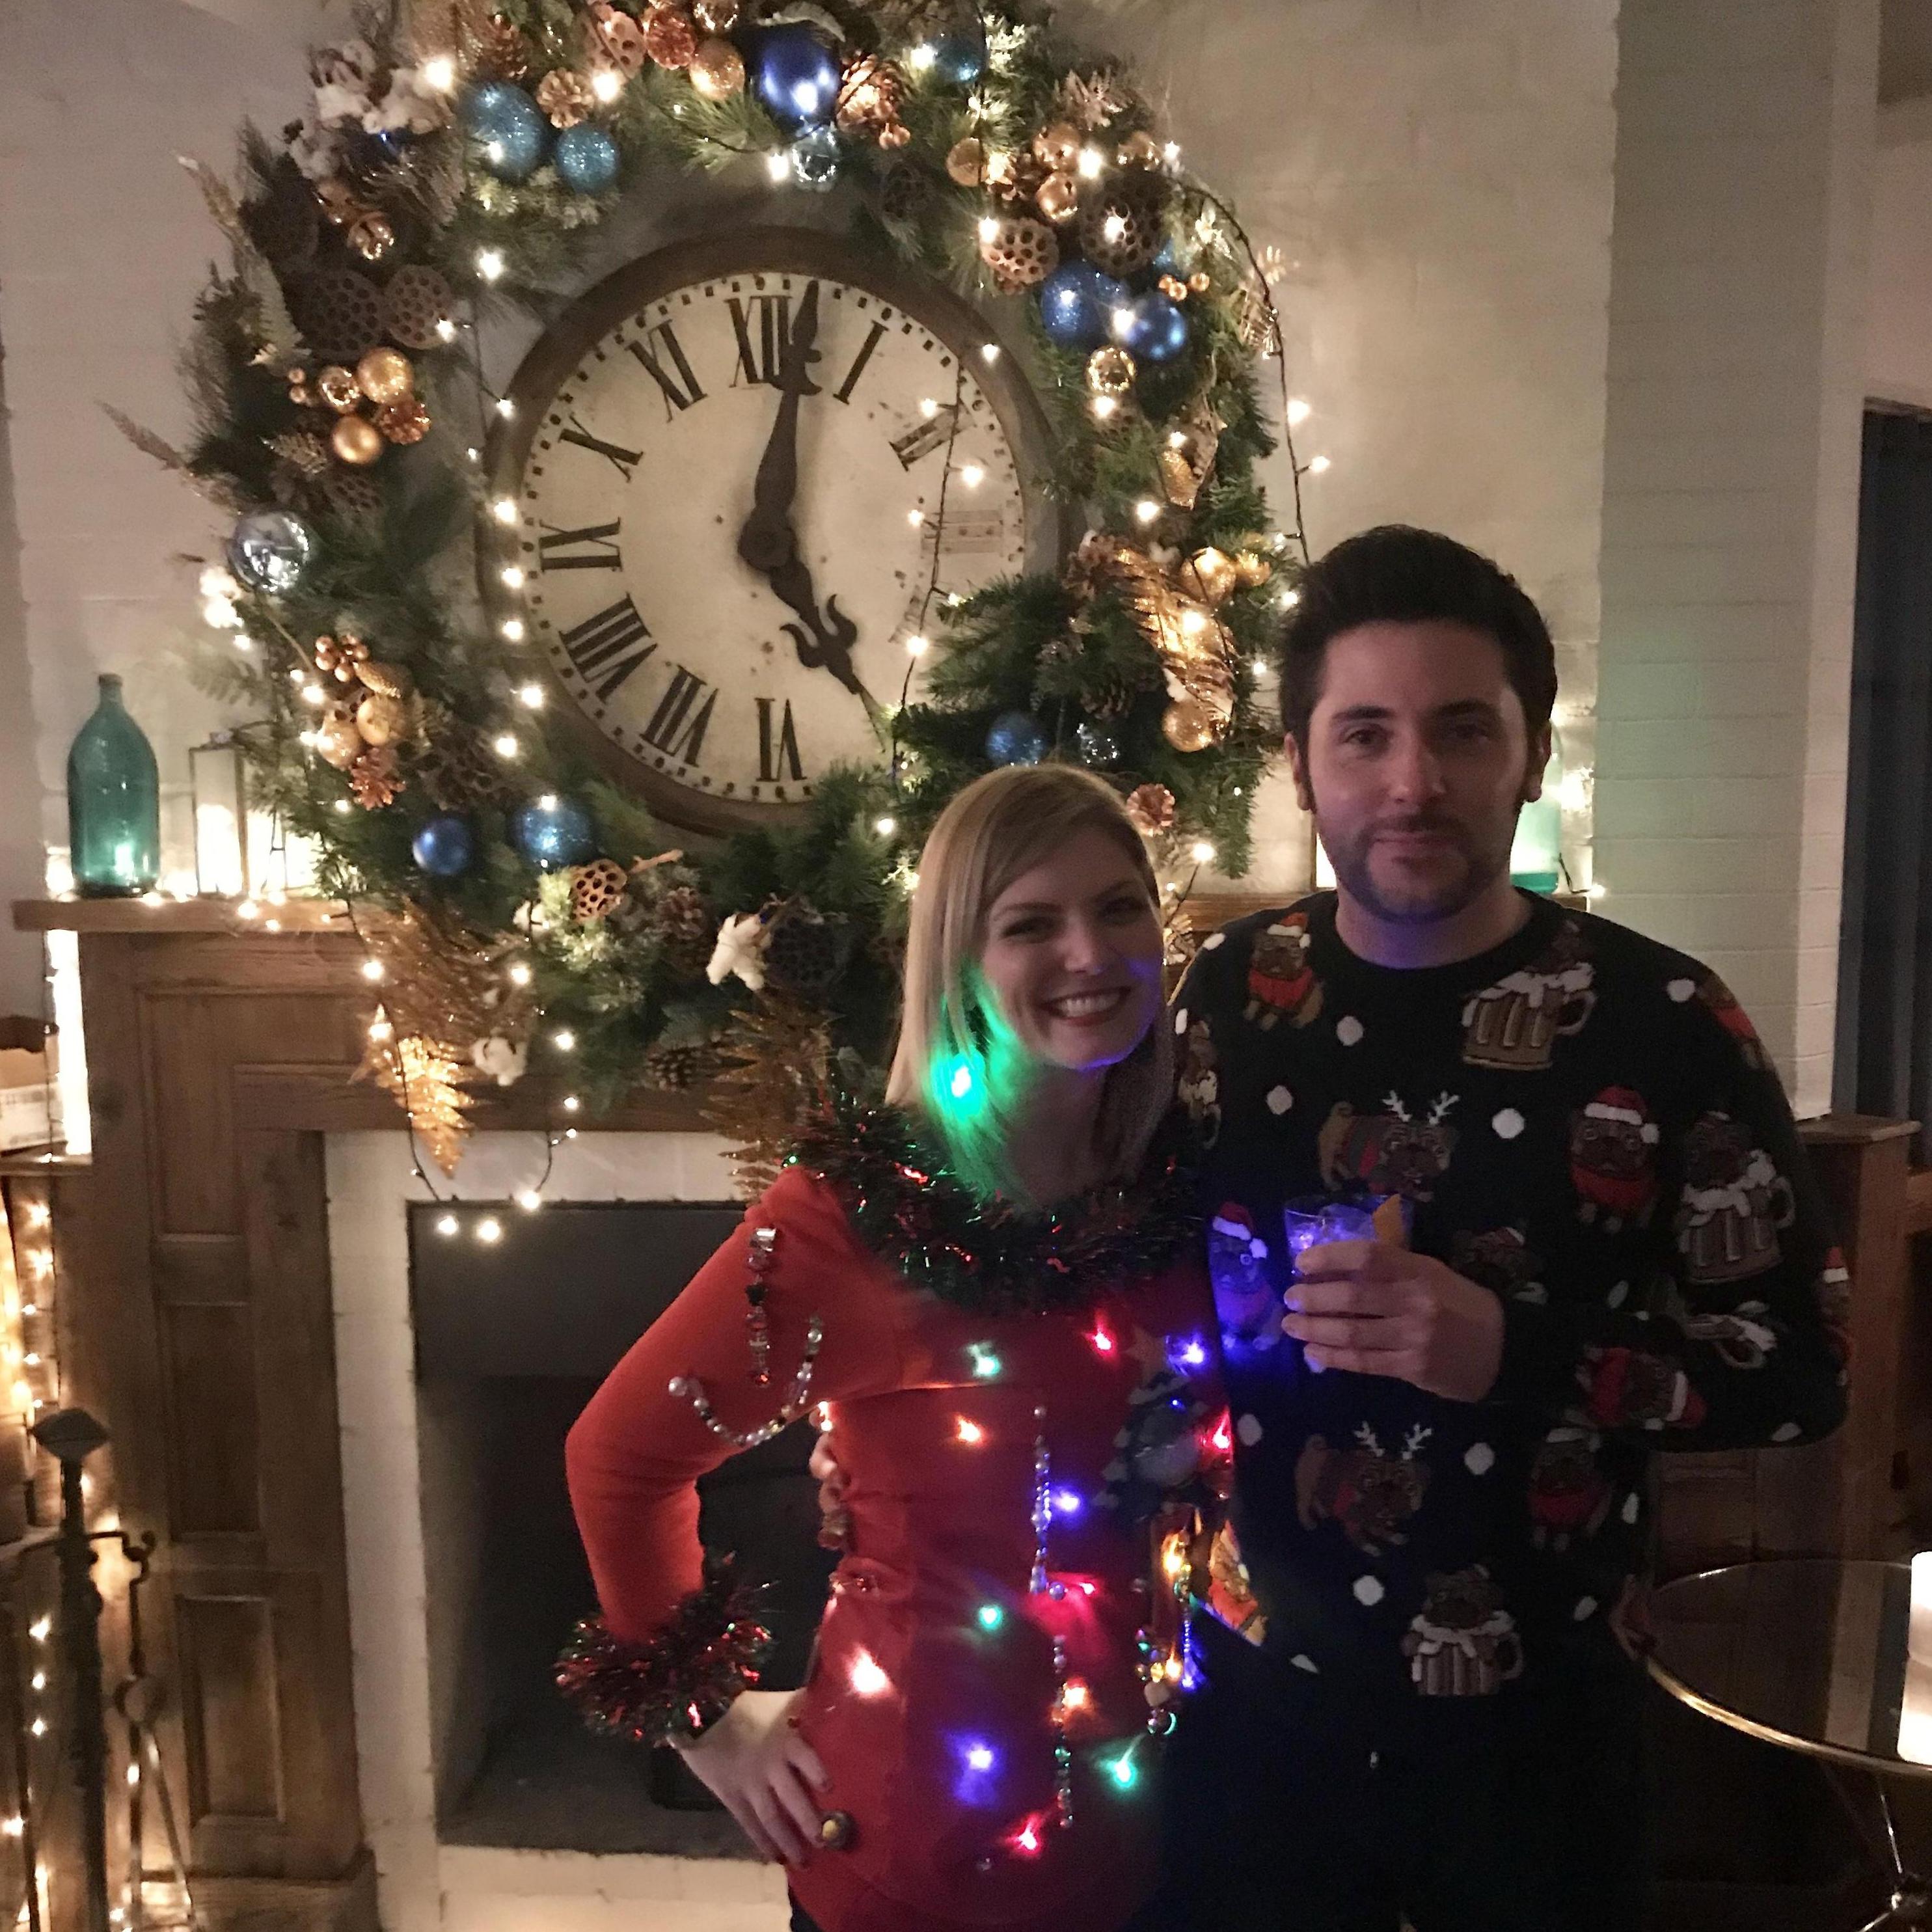 Celebrating the 10th annual BJ in our ugliest bad jumpers
2018